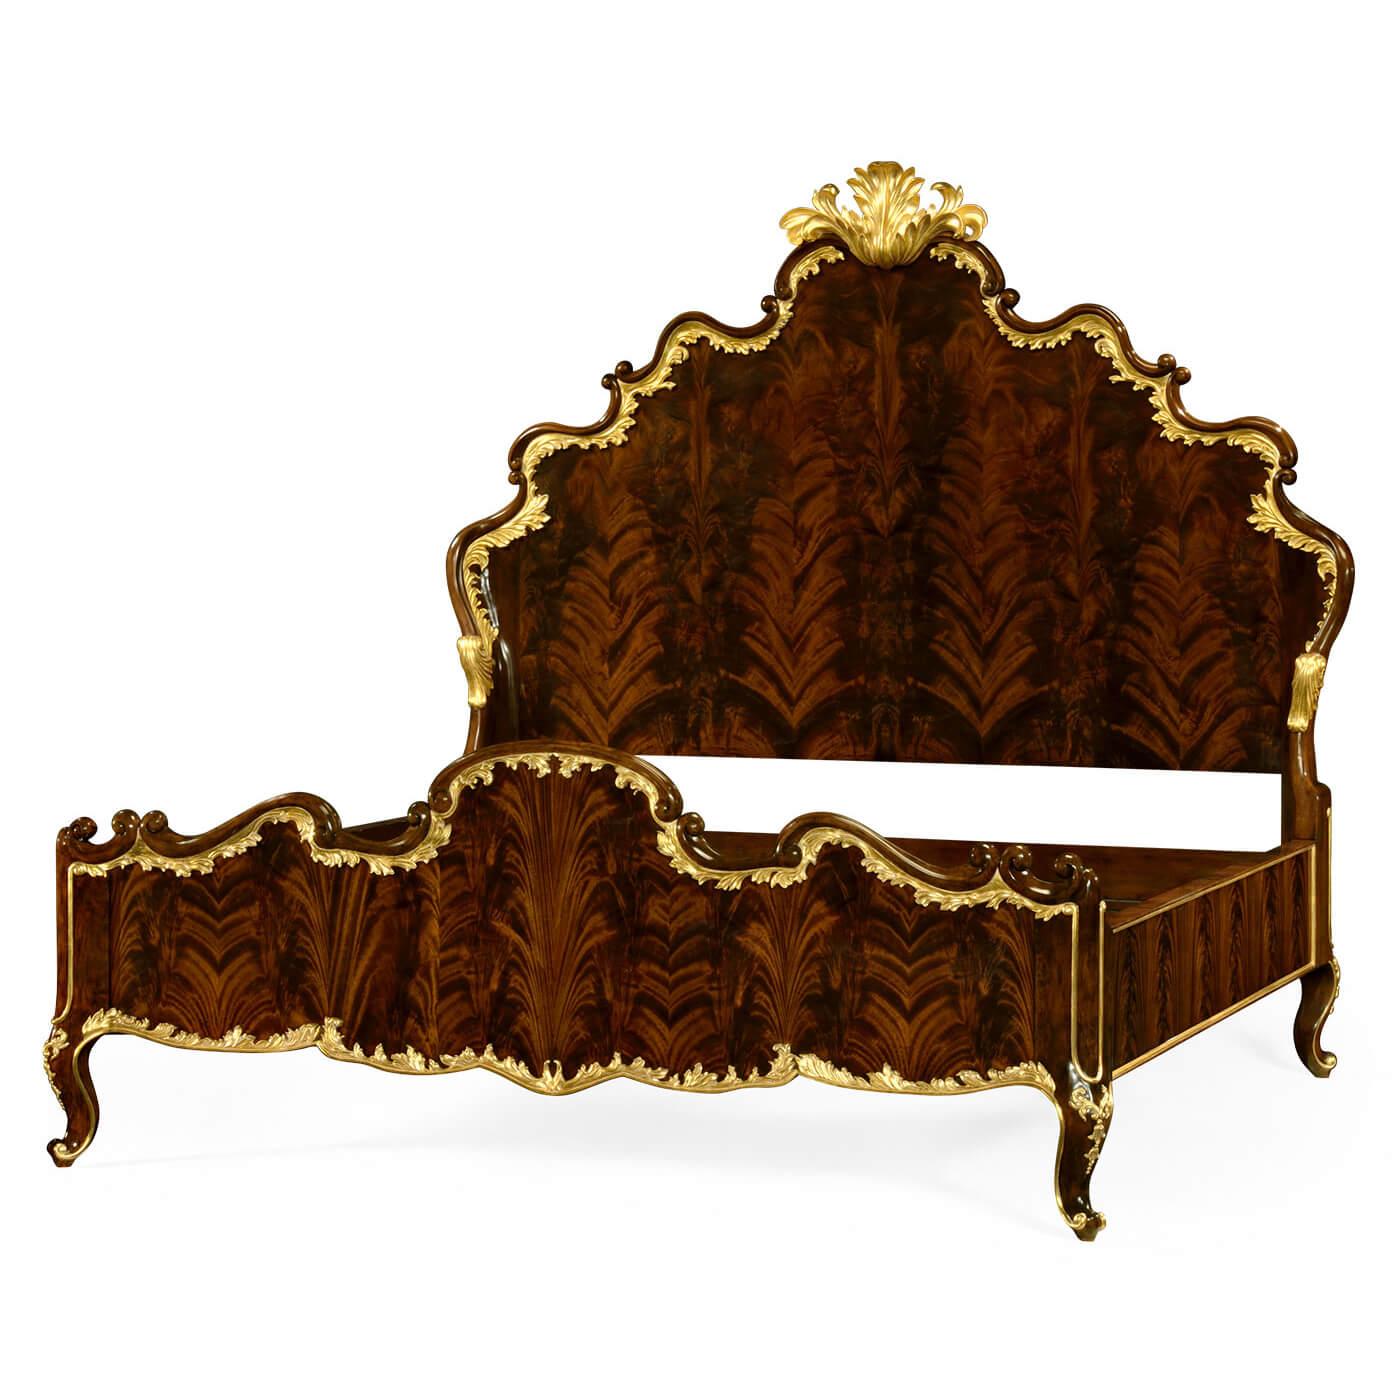 A luxurious Rococo style antique bed in high lustre antique brown mahogany with flamed veneer, intricately carved head and footboard with ornate hand-carved gilded details along the edges, frame, and legs.

Dimensions: 88